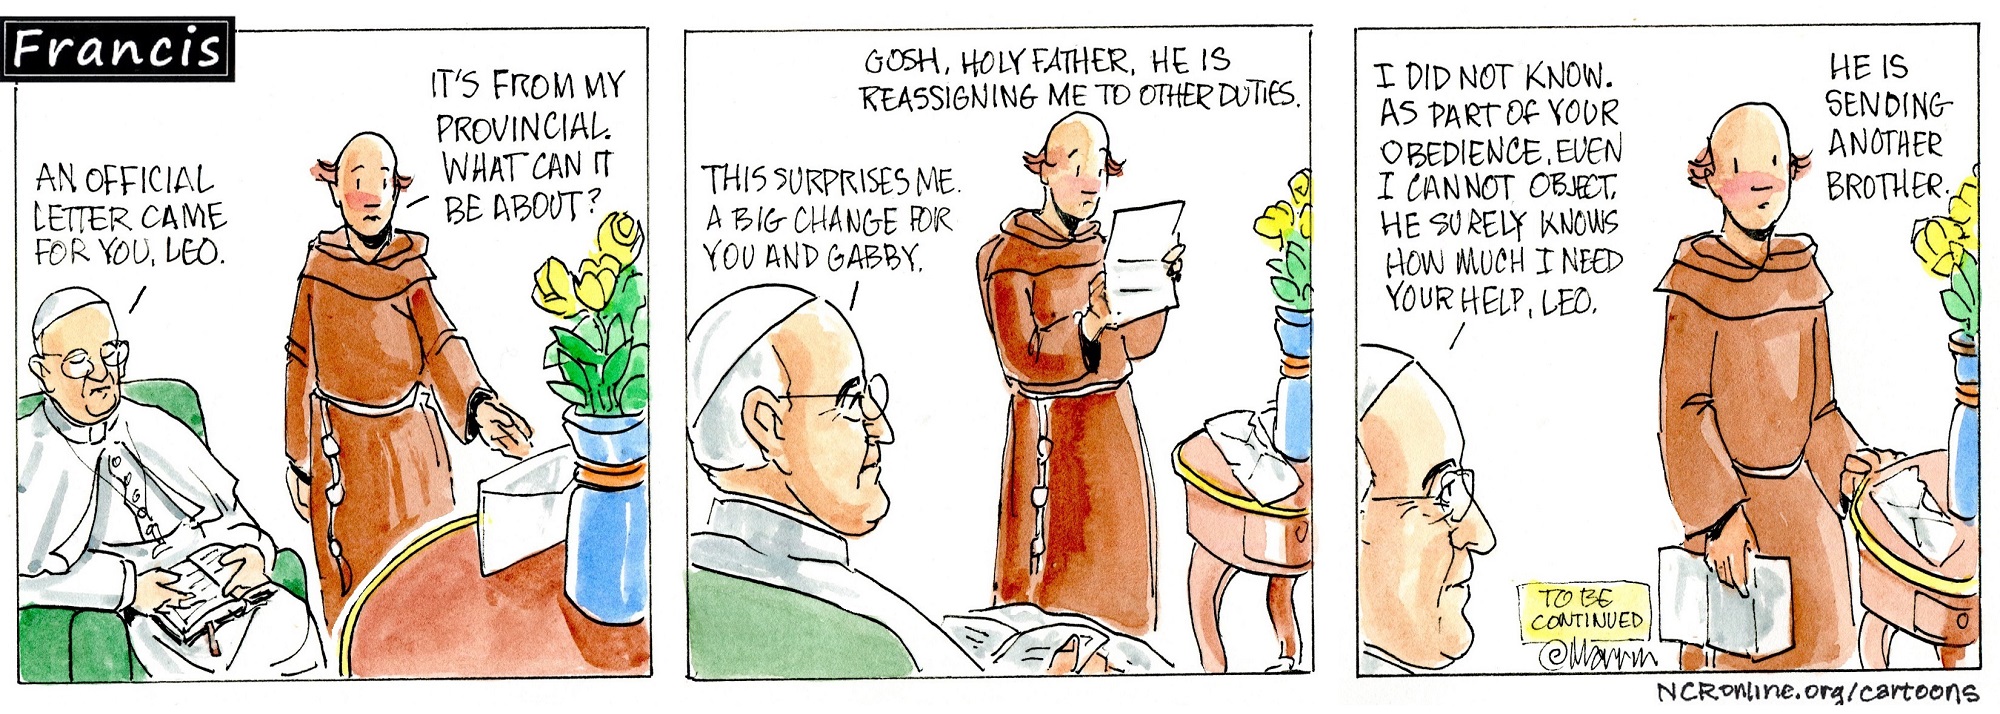 Francis, the comic strip: A letter for Brother Leo foretells a surprise to come.